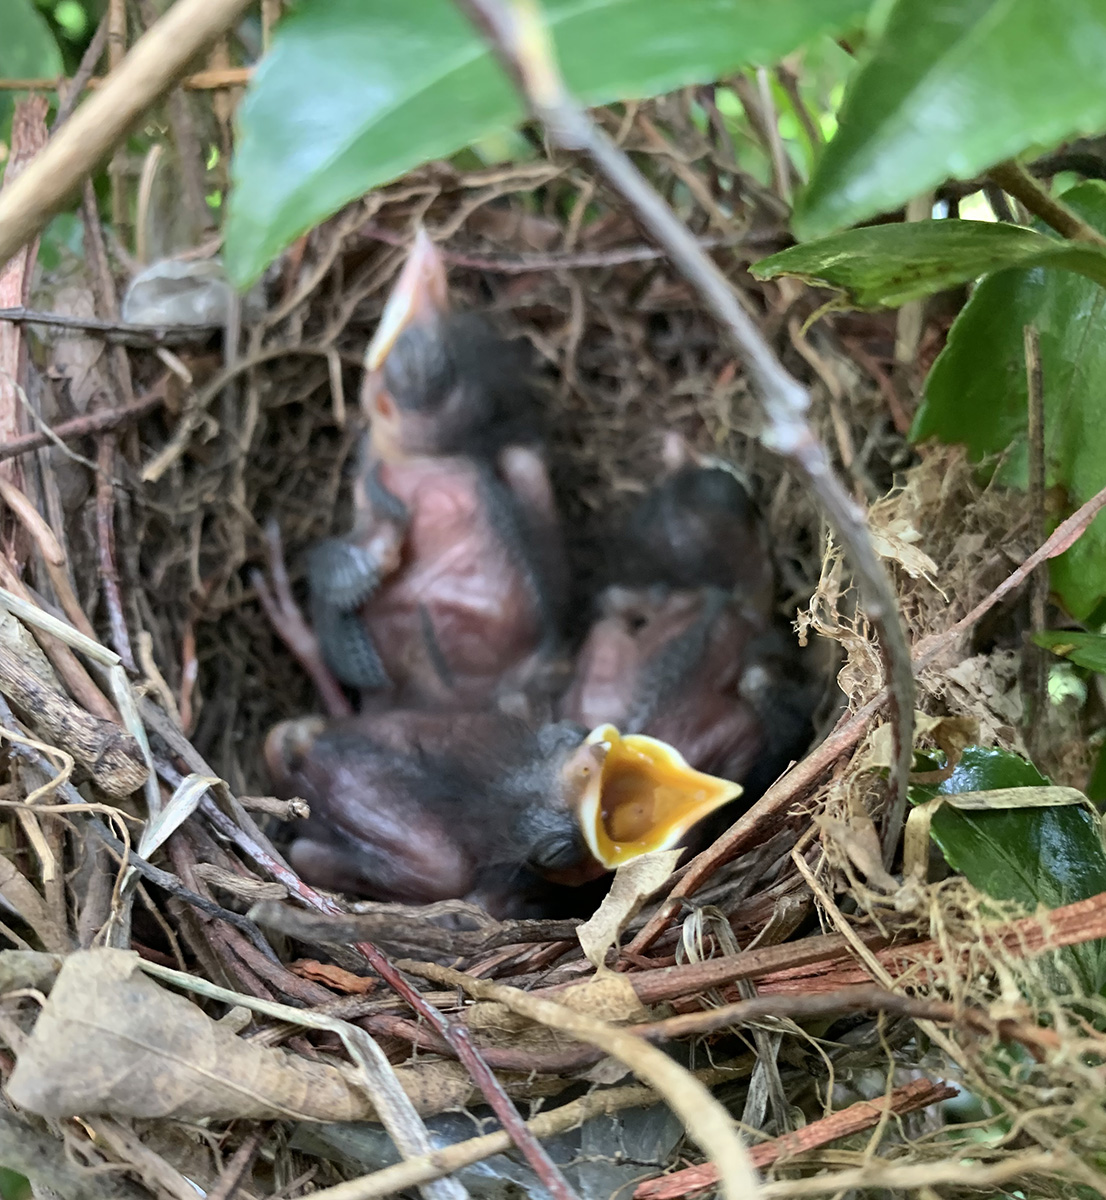 An image of three baby catbirds in the nest within the shrub